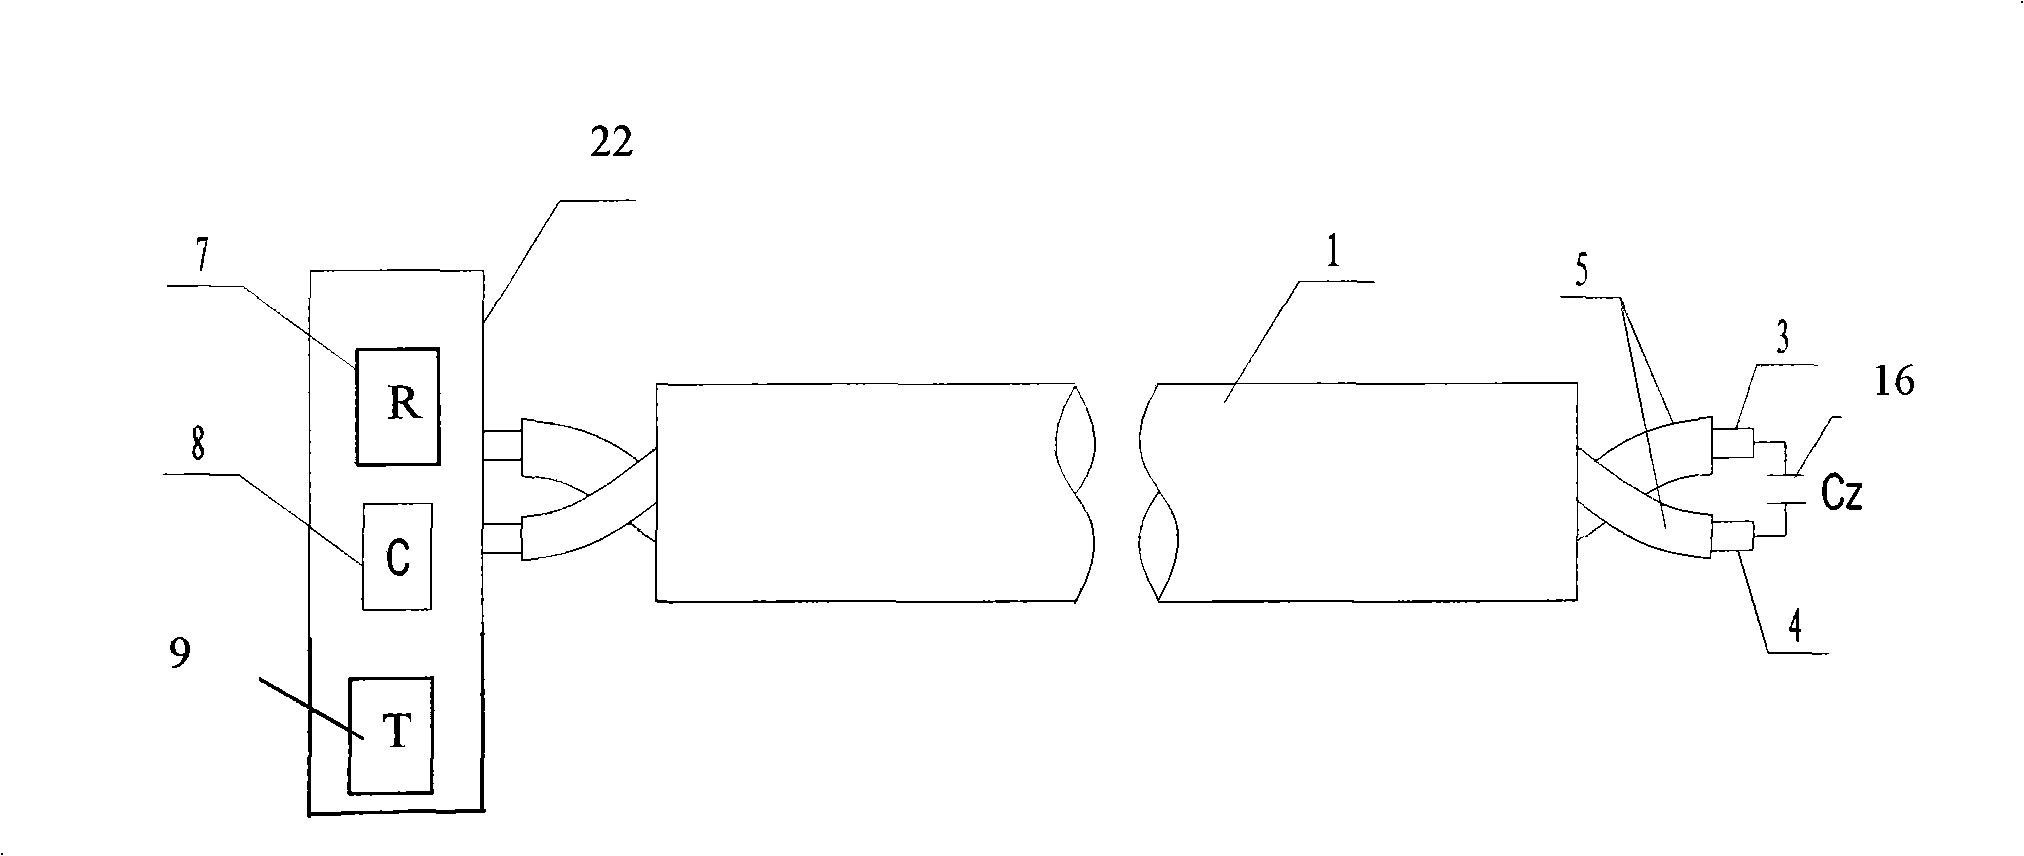 Line-type heat sensing fire detector with terminal capacitor